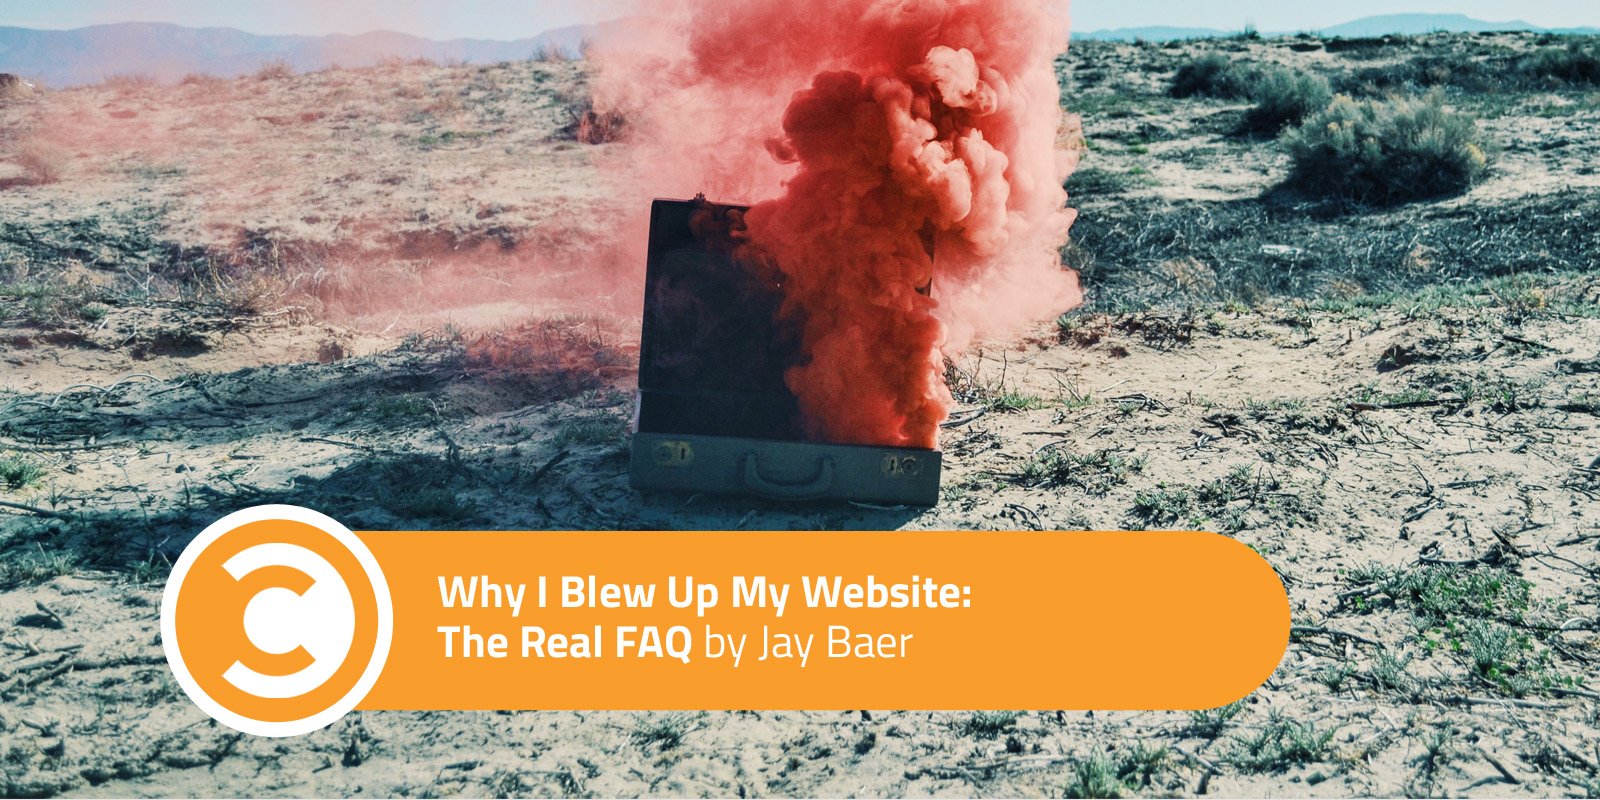 Why I Blew Up My Website The Real FAQ